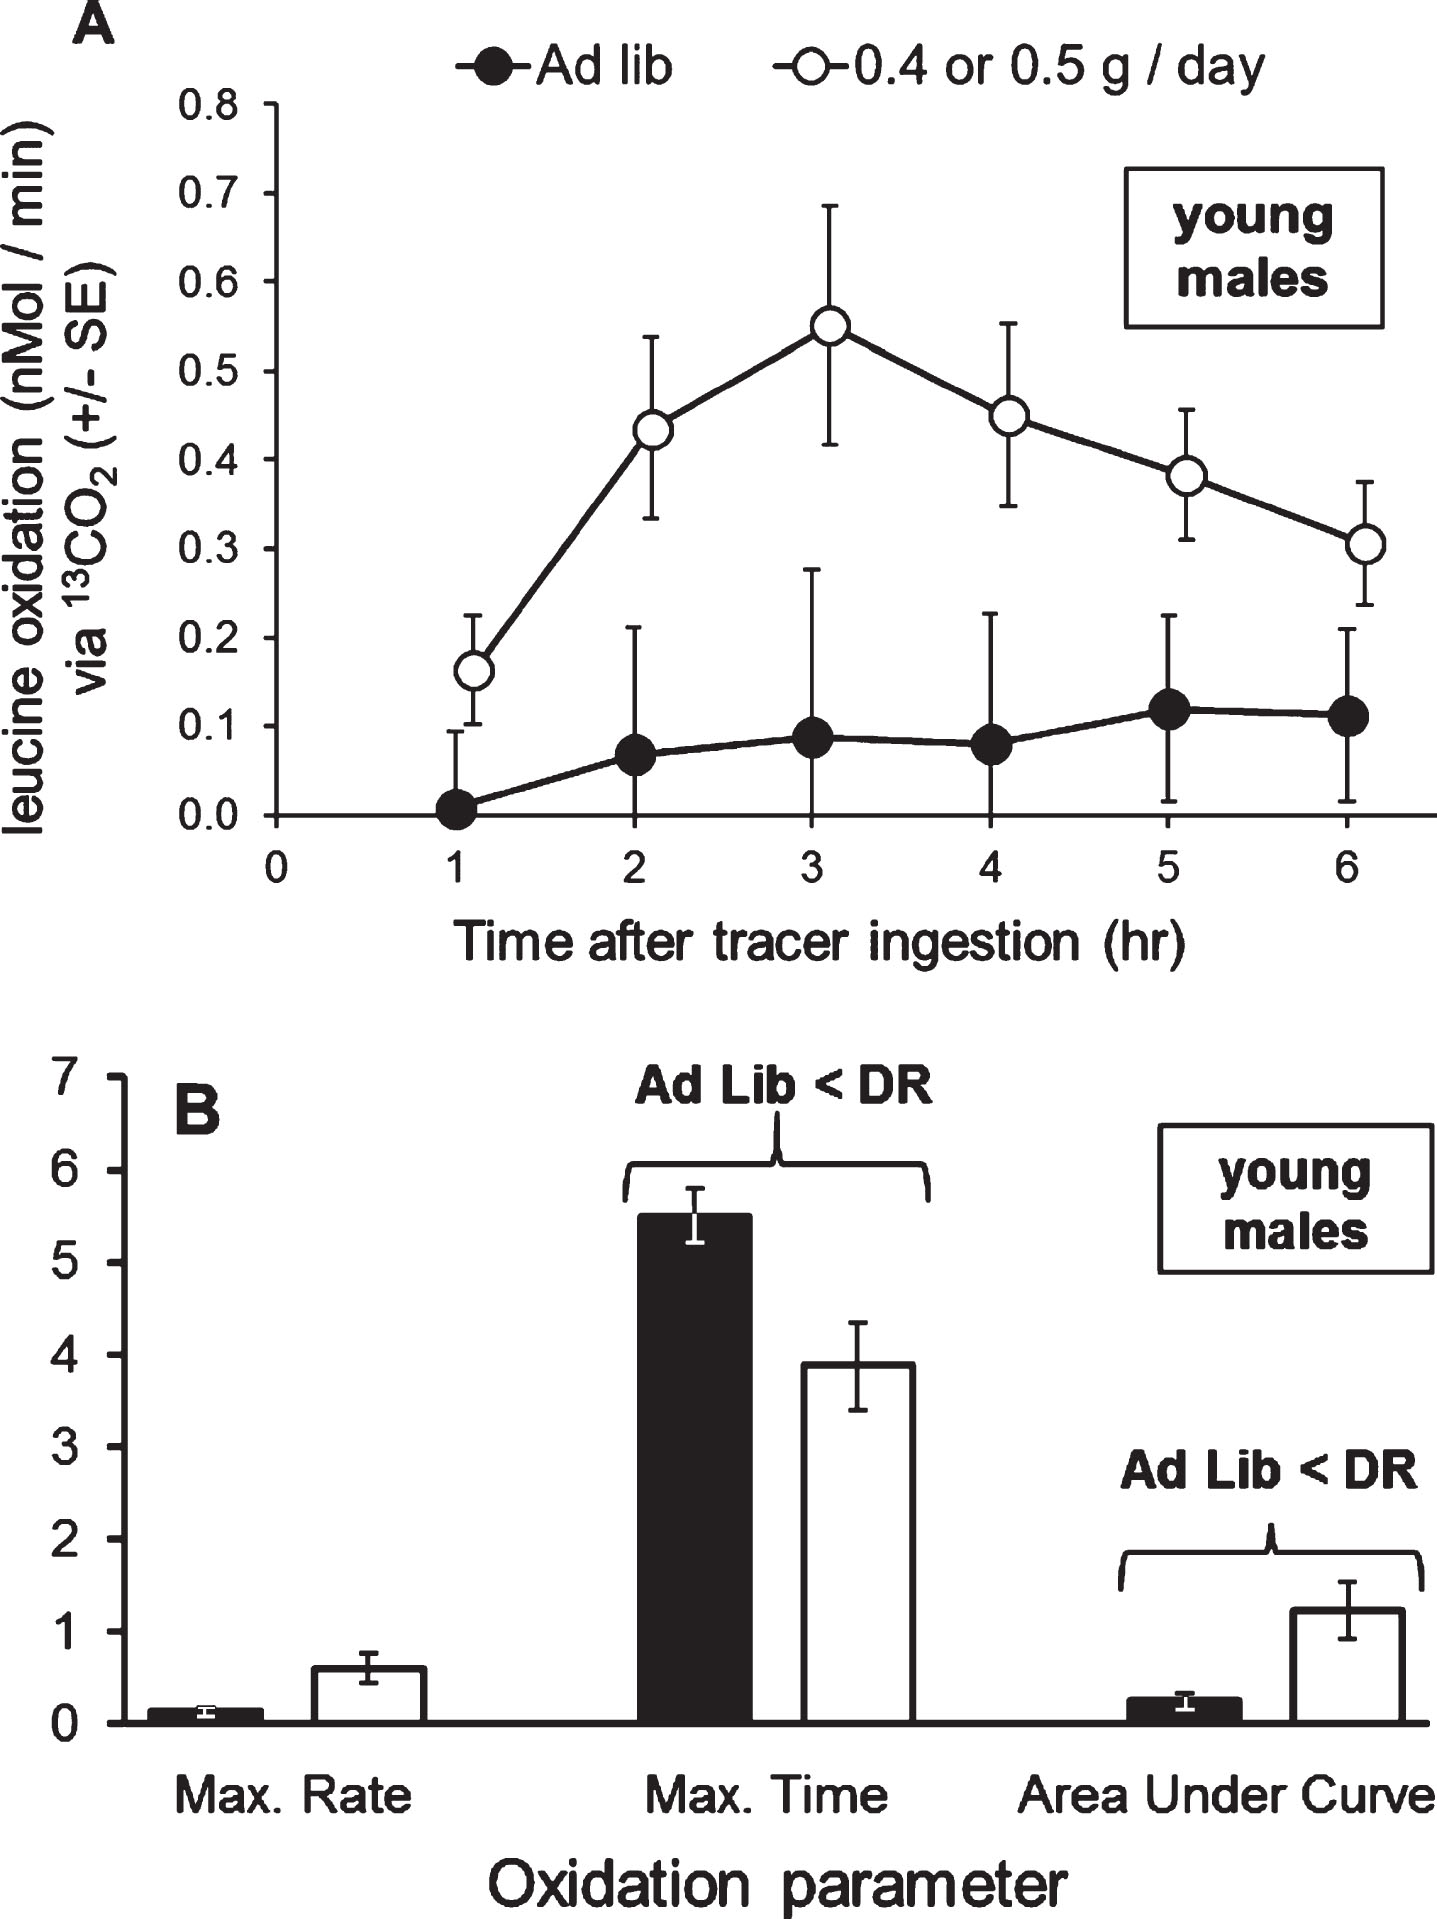 In young adult male grasshoppers, organismal oxidation of leucine was increased upon a 30% diet. A) The 30% diet marginally increased oxidation of leucine from 2 to 5 hours after tracer ingestion. B) The 30% diet significantly decreased the time of occurrence of the maximum rate of oxidation (hours after tracer ingestion) and significantly increased the Area Under the Curve (nMol/min * 100), but did not change the maximum rate of oxidation (nMol/min). Oxidation curve data were tested with one-way MANOVA with time as a dependent variable, and oxidation parameters were tested with Student t-tests. Error bars show one Standard Error.